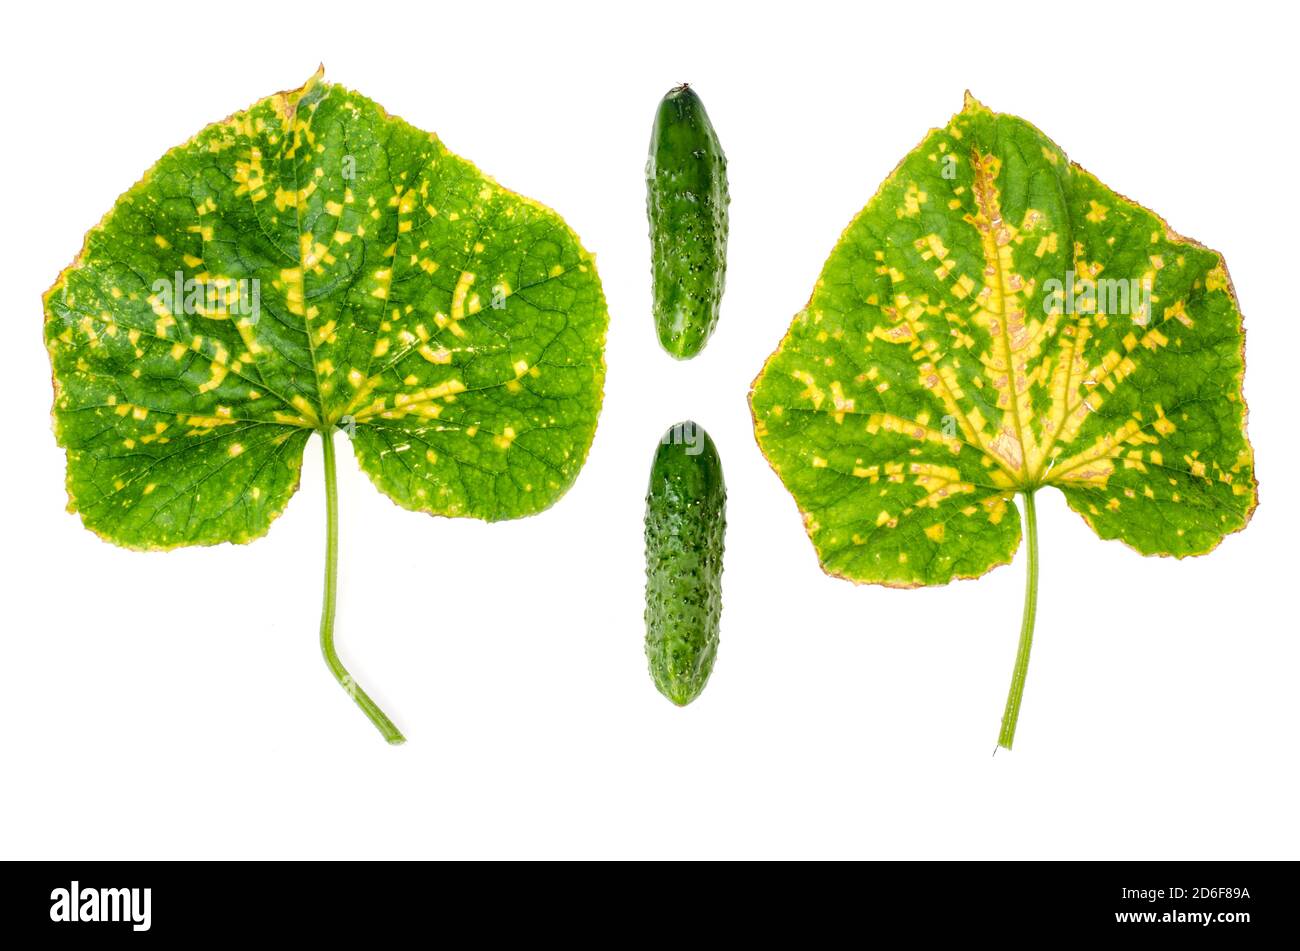 Green cucumber leaf damaged by diseases and pests. Studio Photo Stock Photo